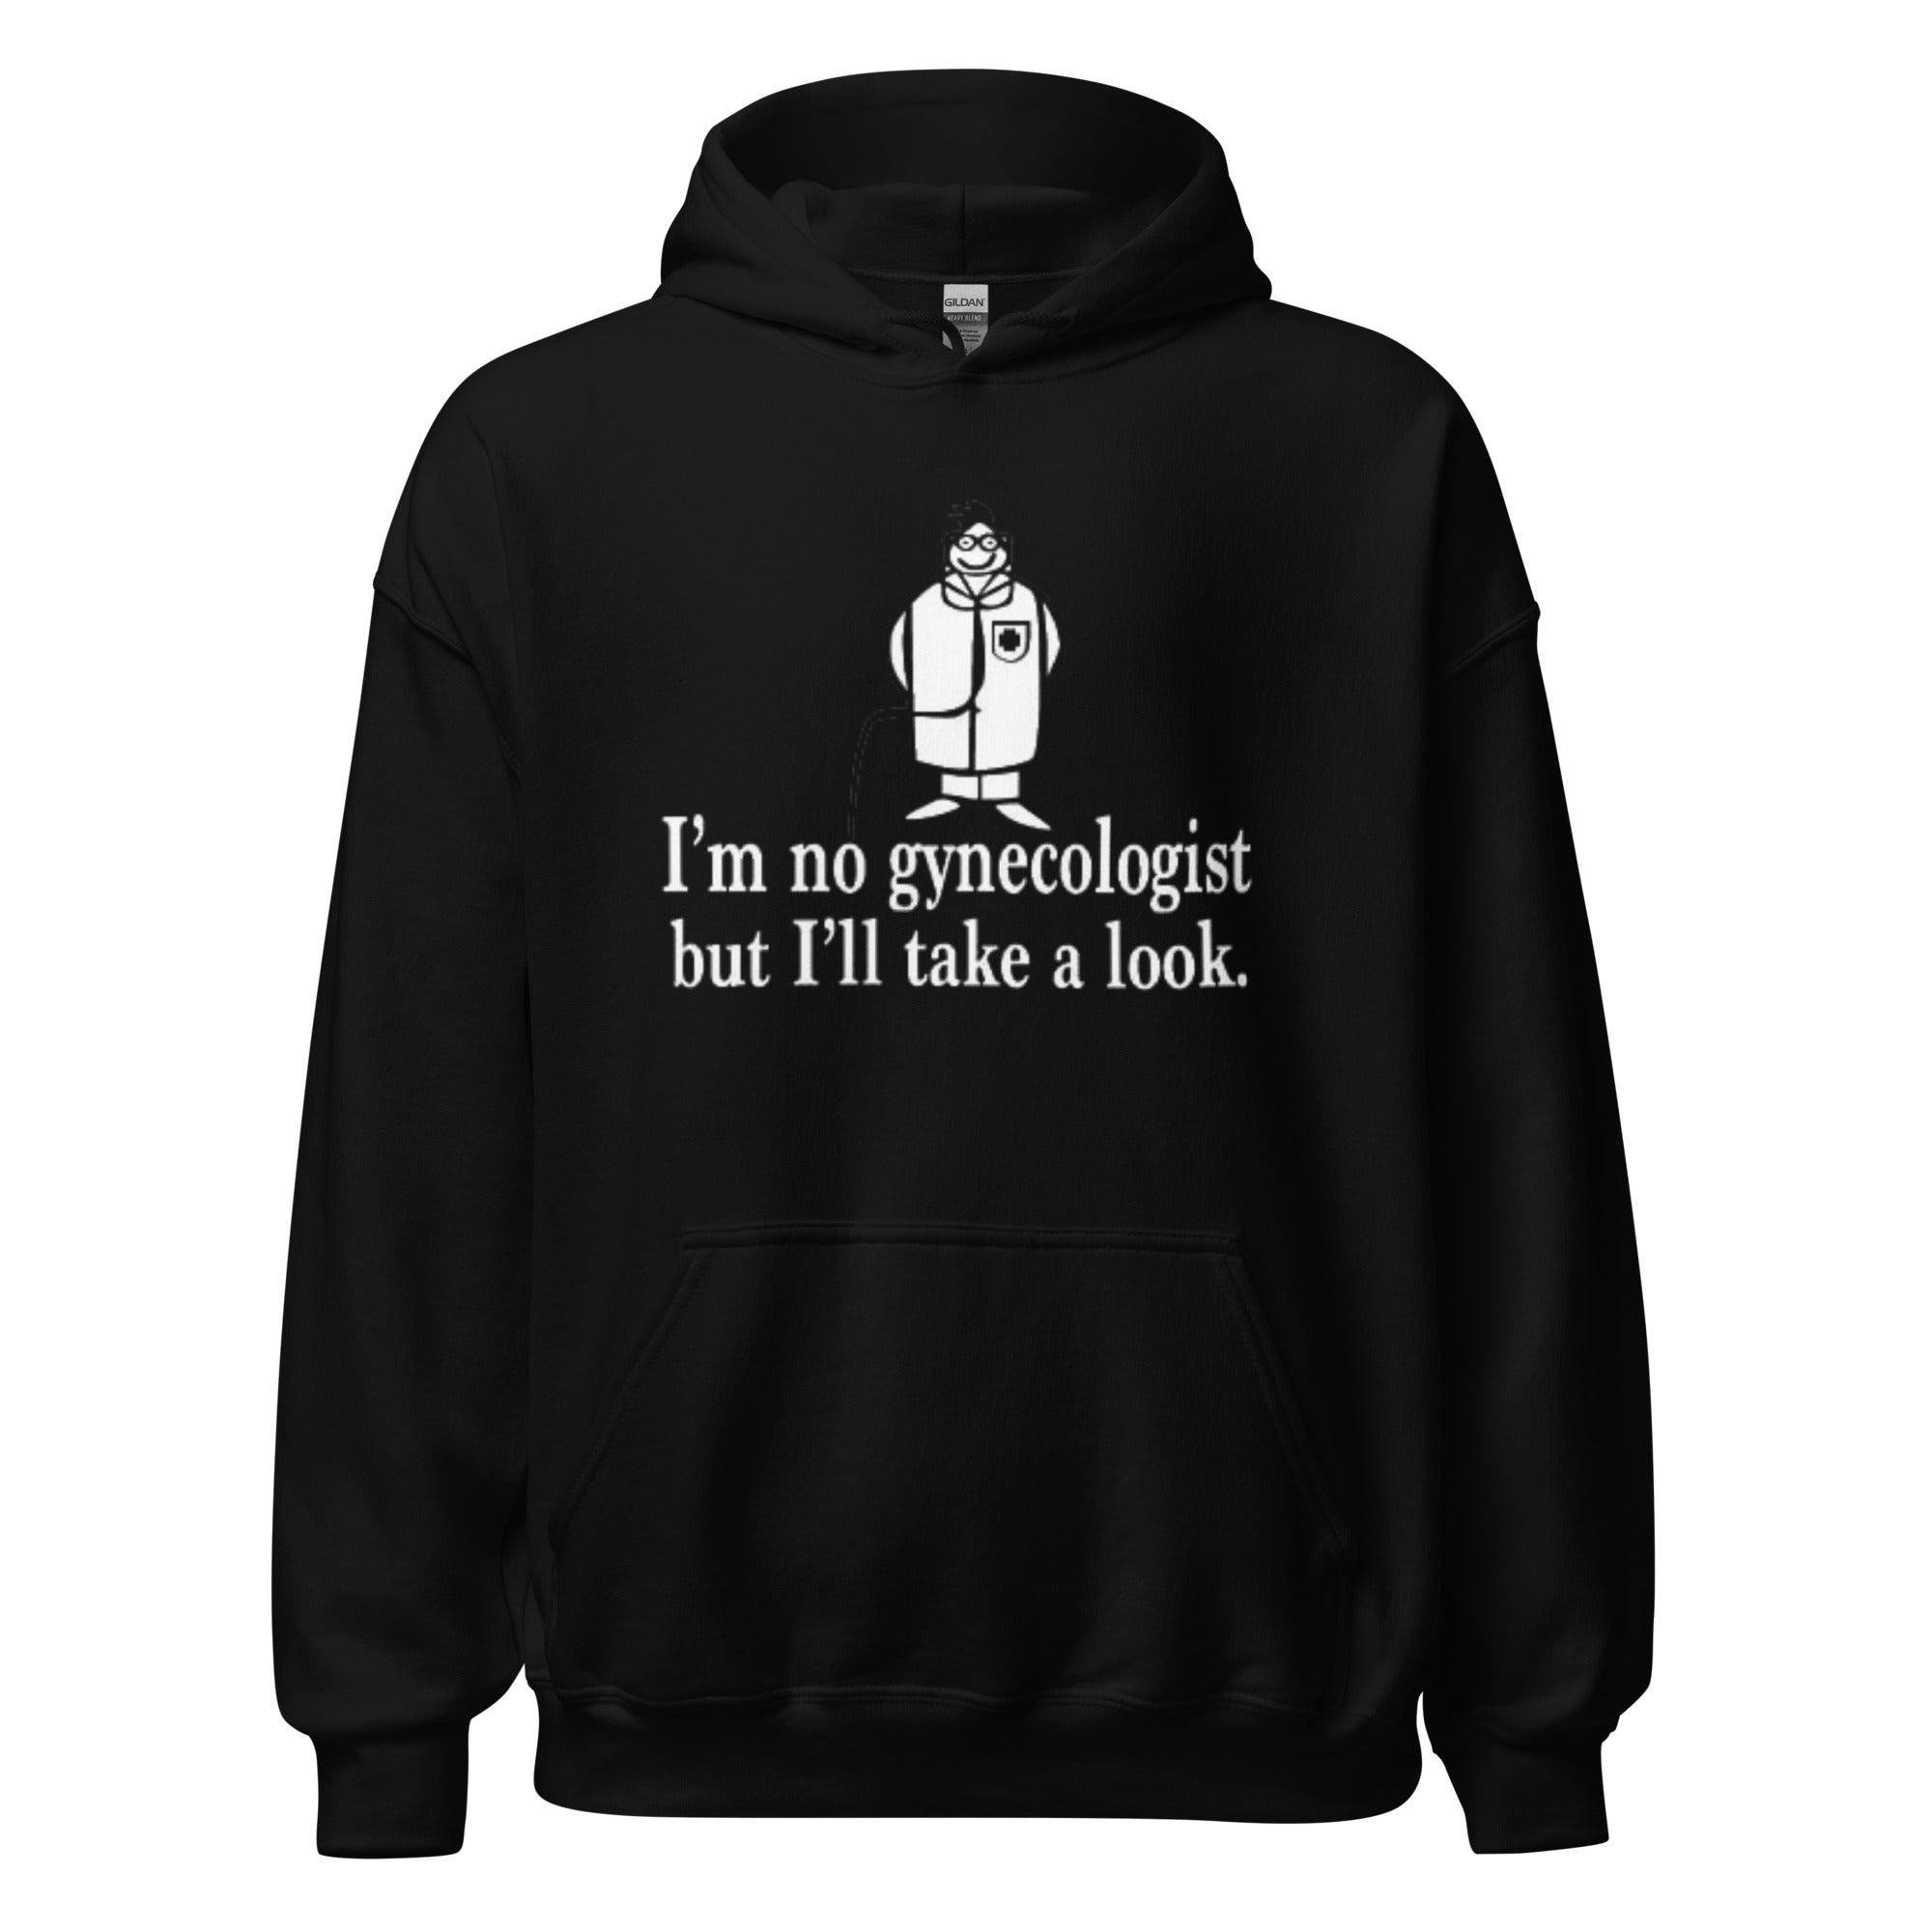 Humor Hoodie I'm No Gynecologist But I'll Take A Look Blended Cotton Midweight Unisex Pullover - TopKoalaTee